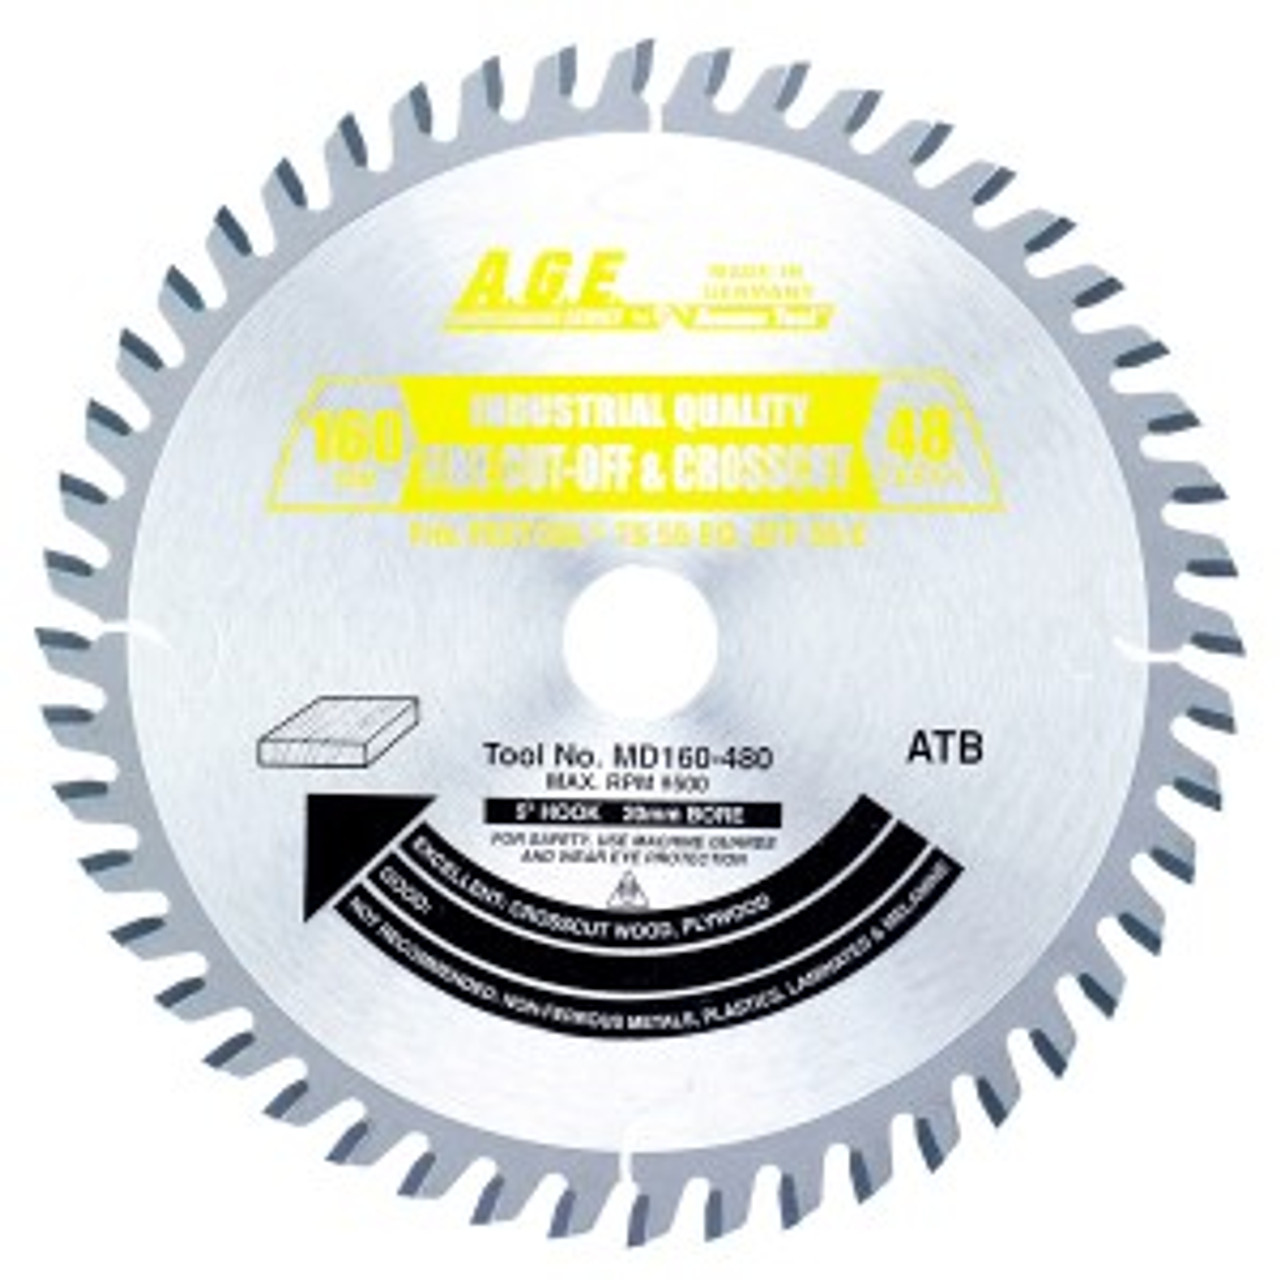 MD160-480 Carbide Tipped Saw Blade for Festool® and Other Track Saw Machines